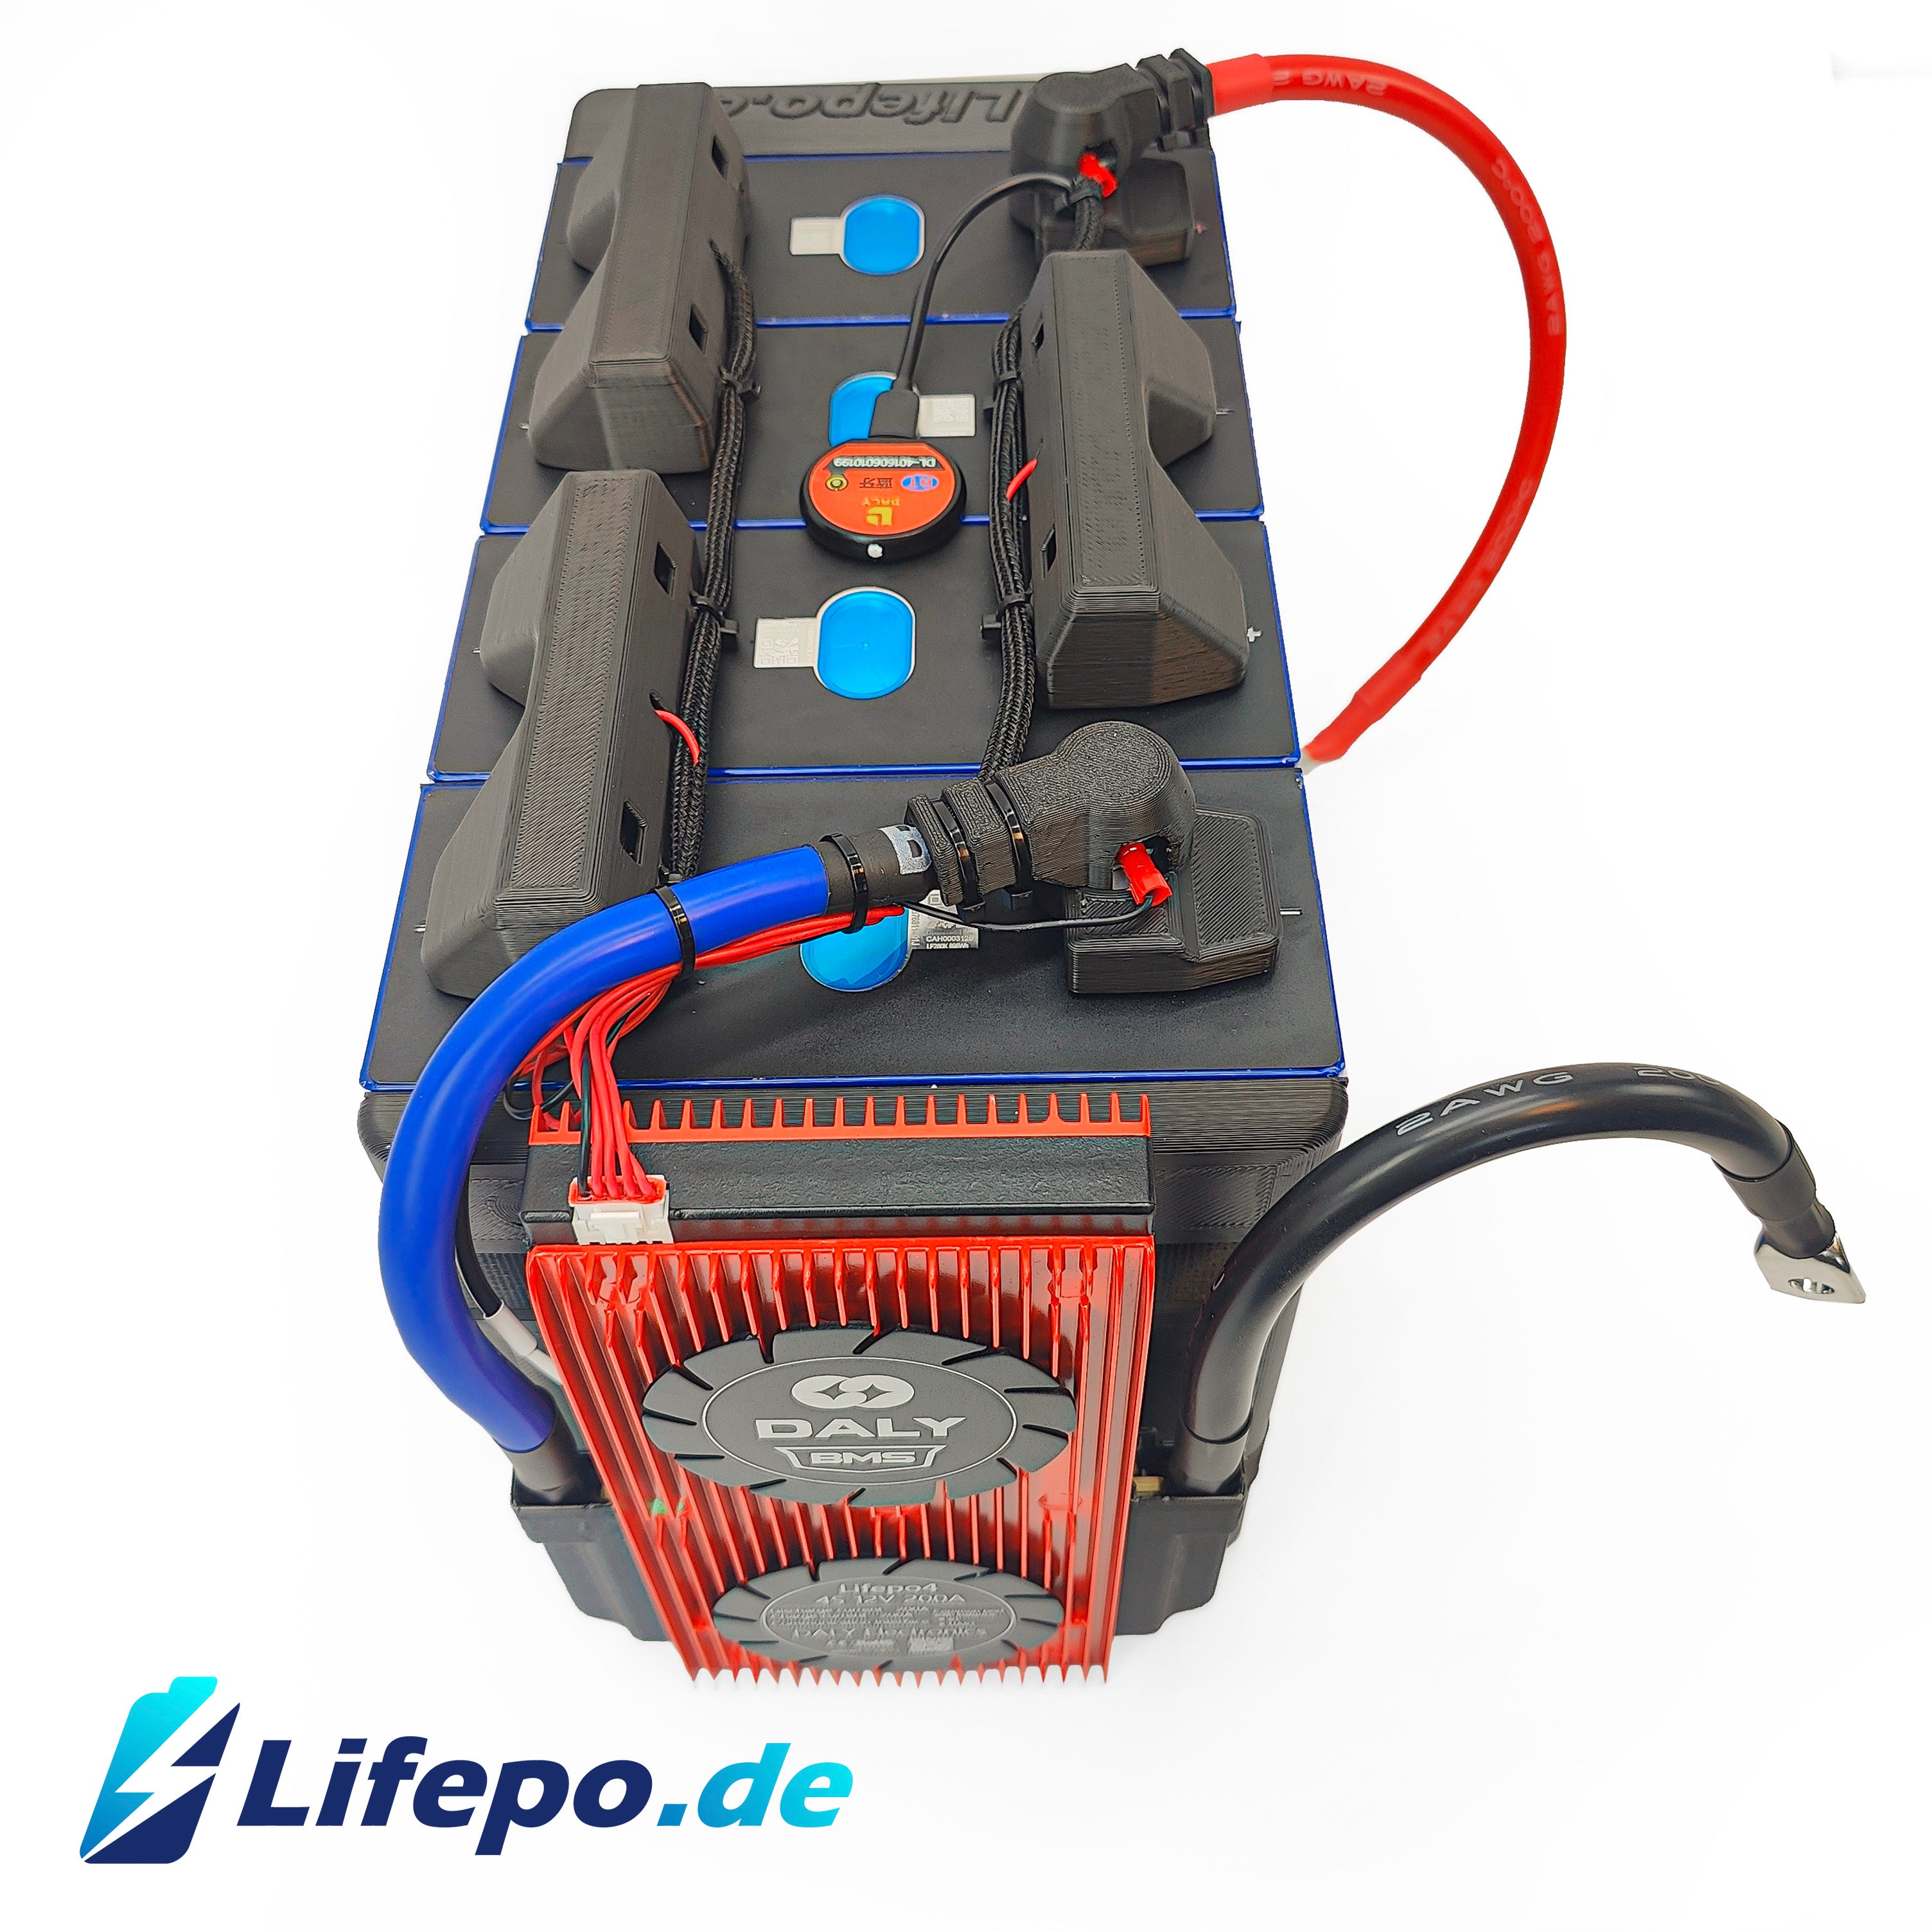 12v 280Ah Lifepo4 battery system with EVE Grade A+ 3.8kWh –